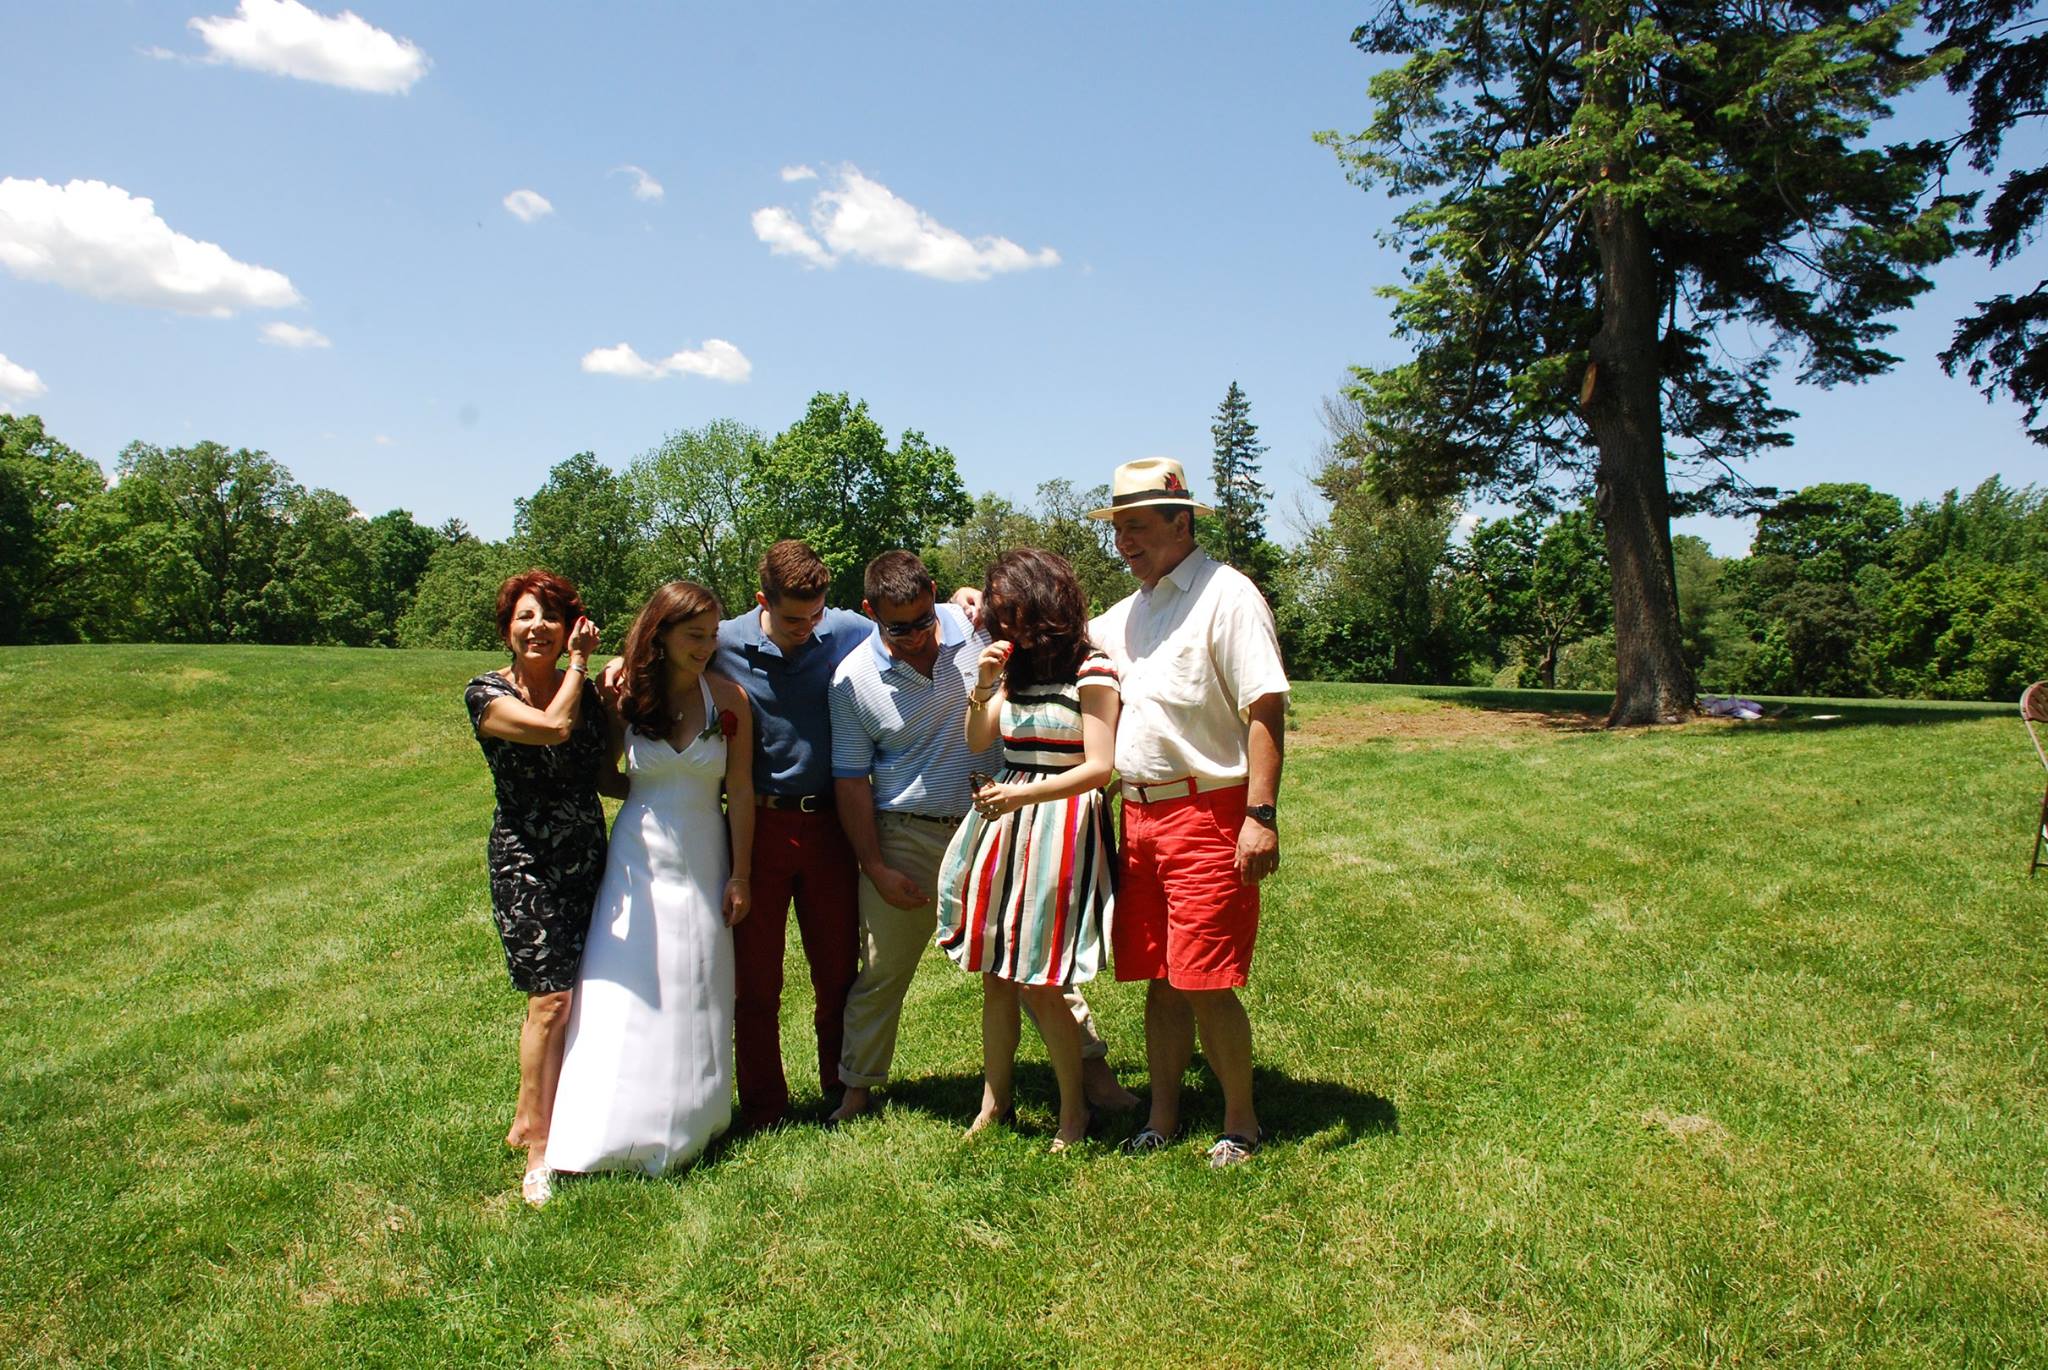 Verleysen family poses on lawn at George School